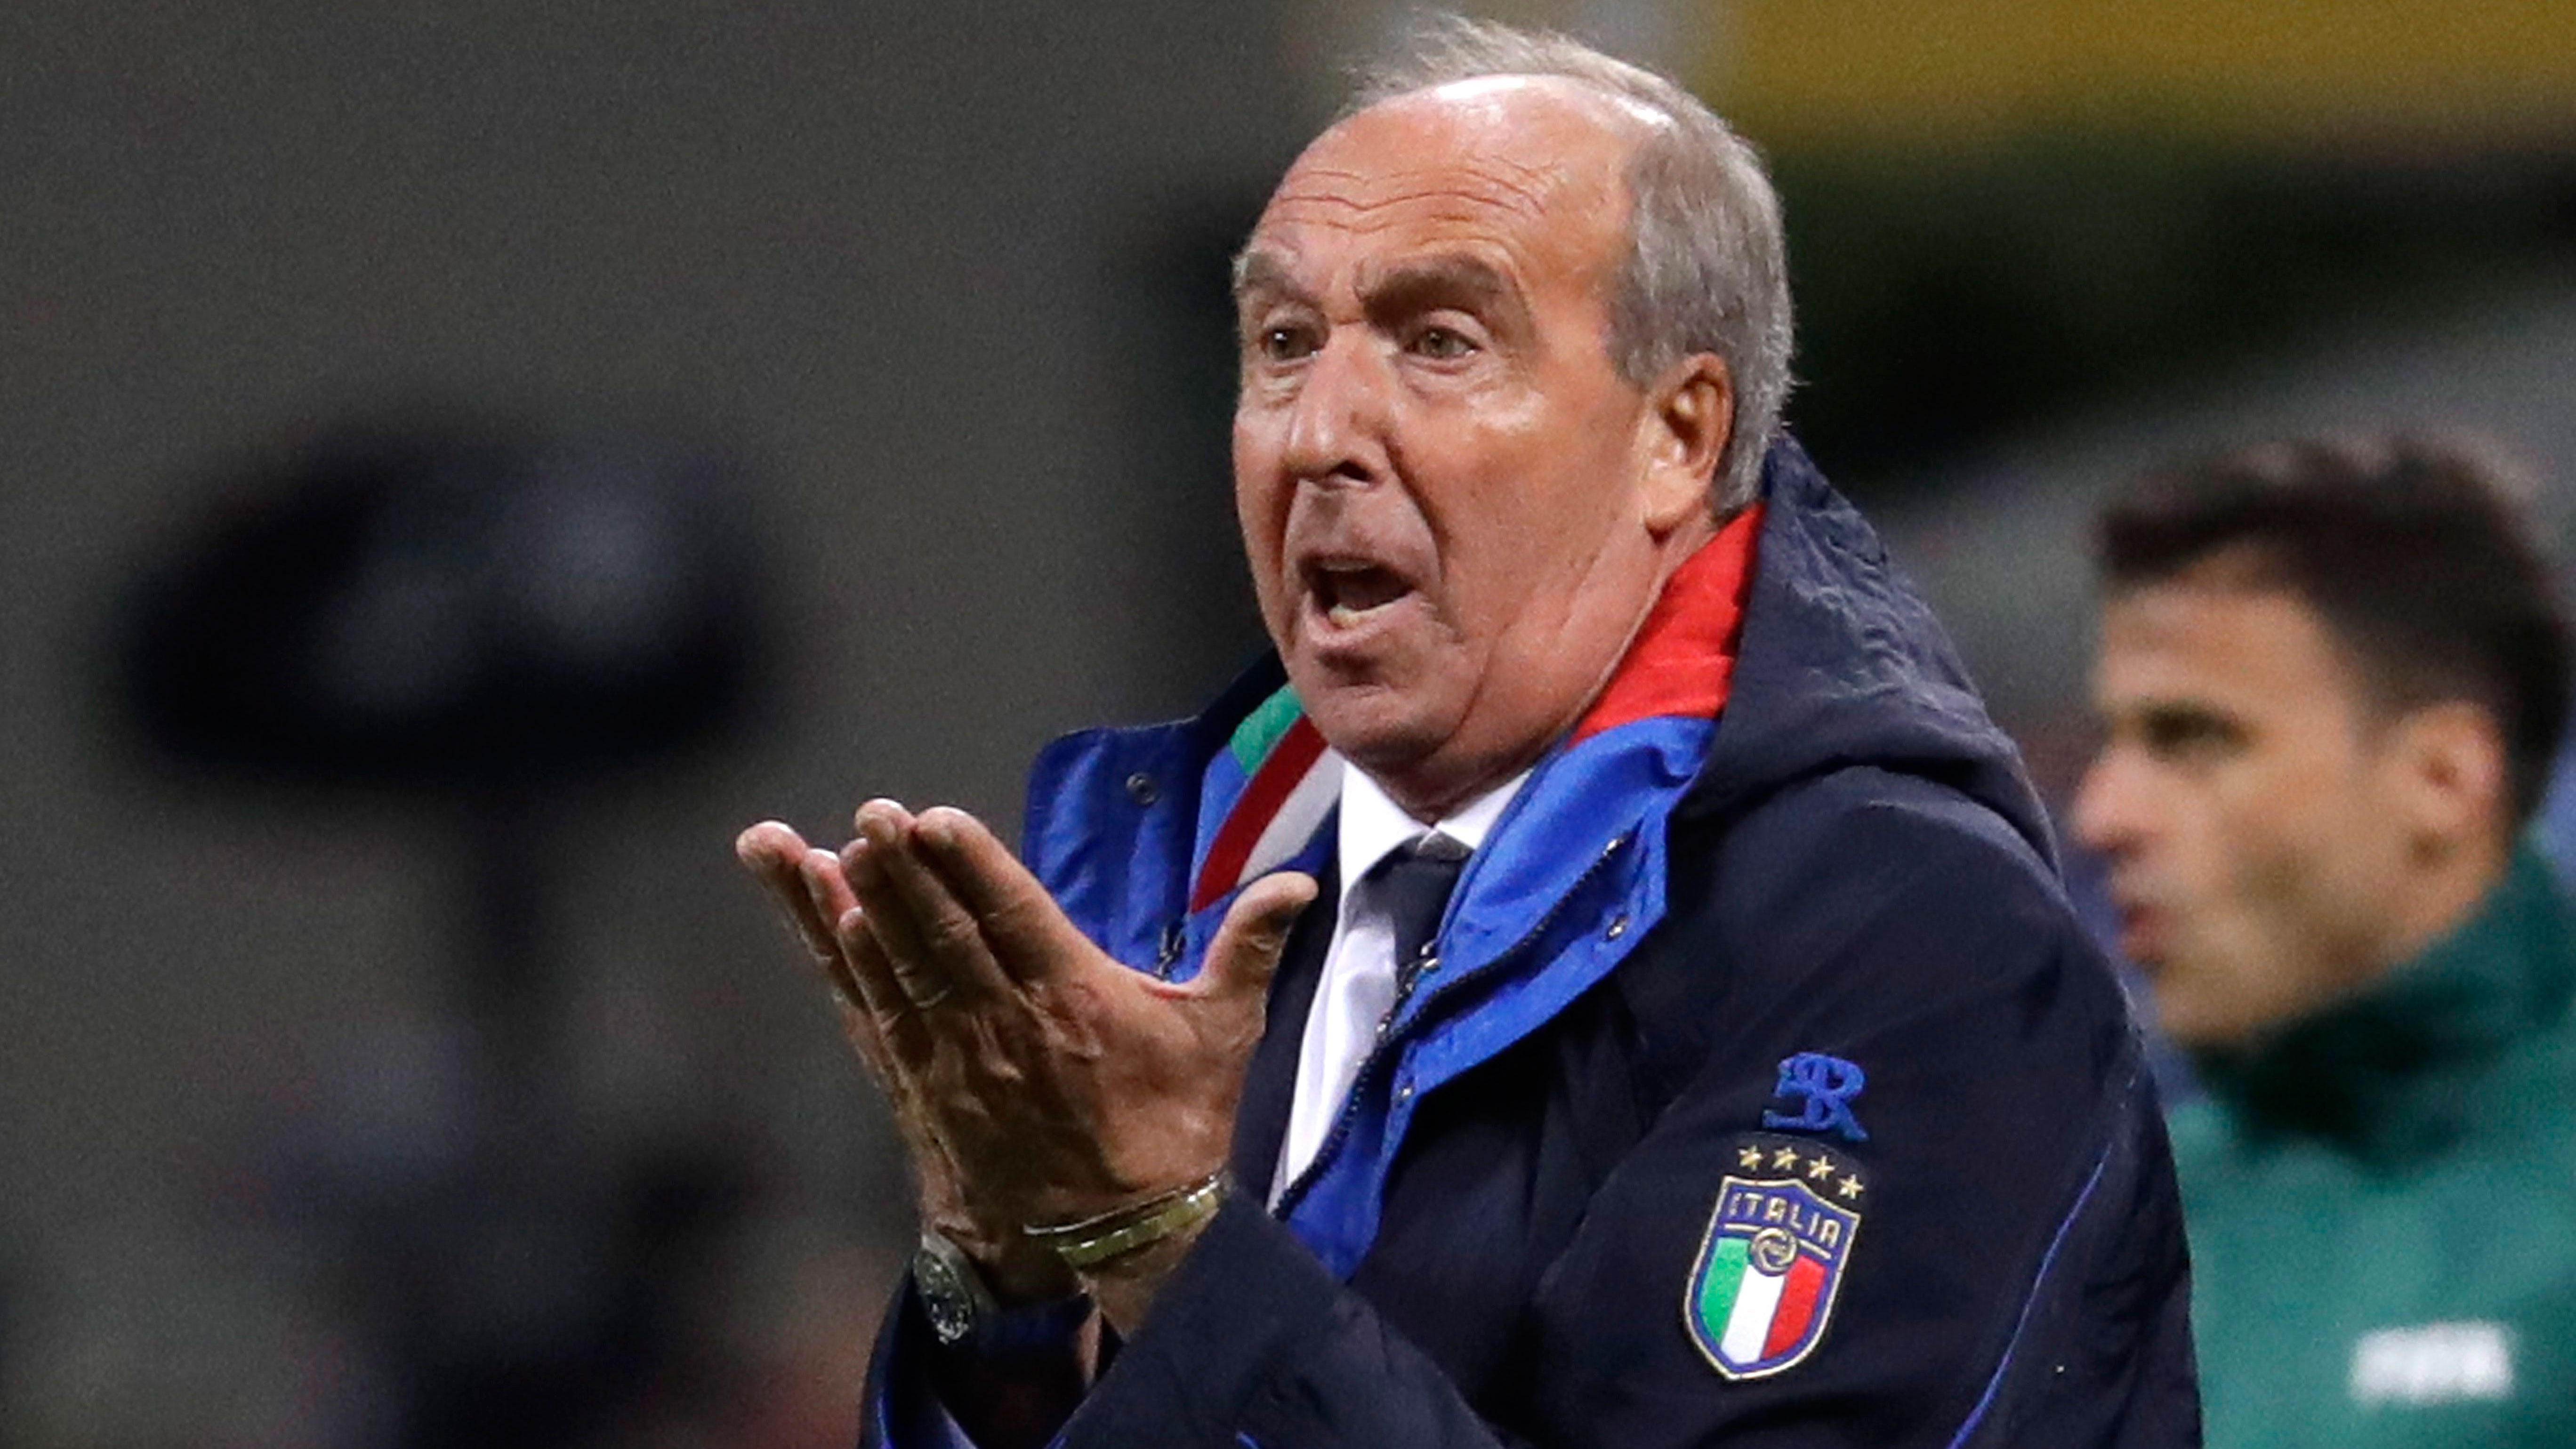 Italy coach Ventura fired after missing World Cup place